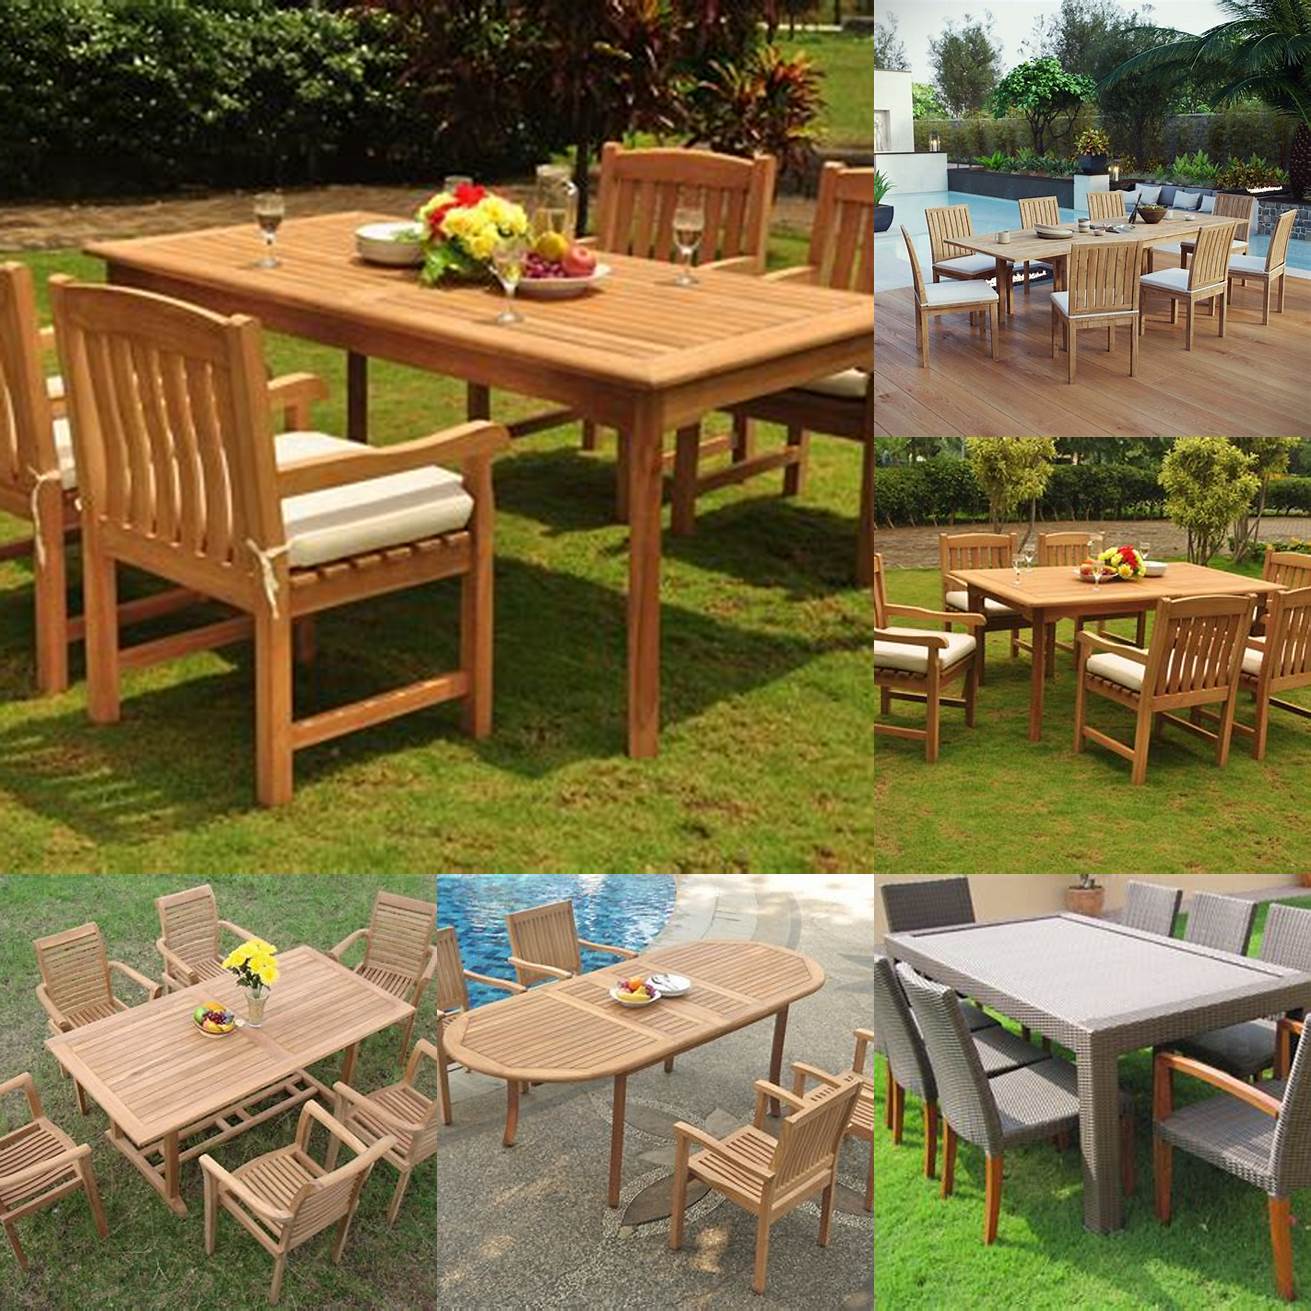 Synthetic teak dining sets